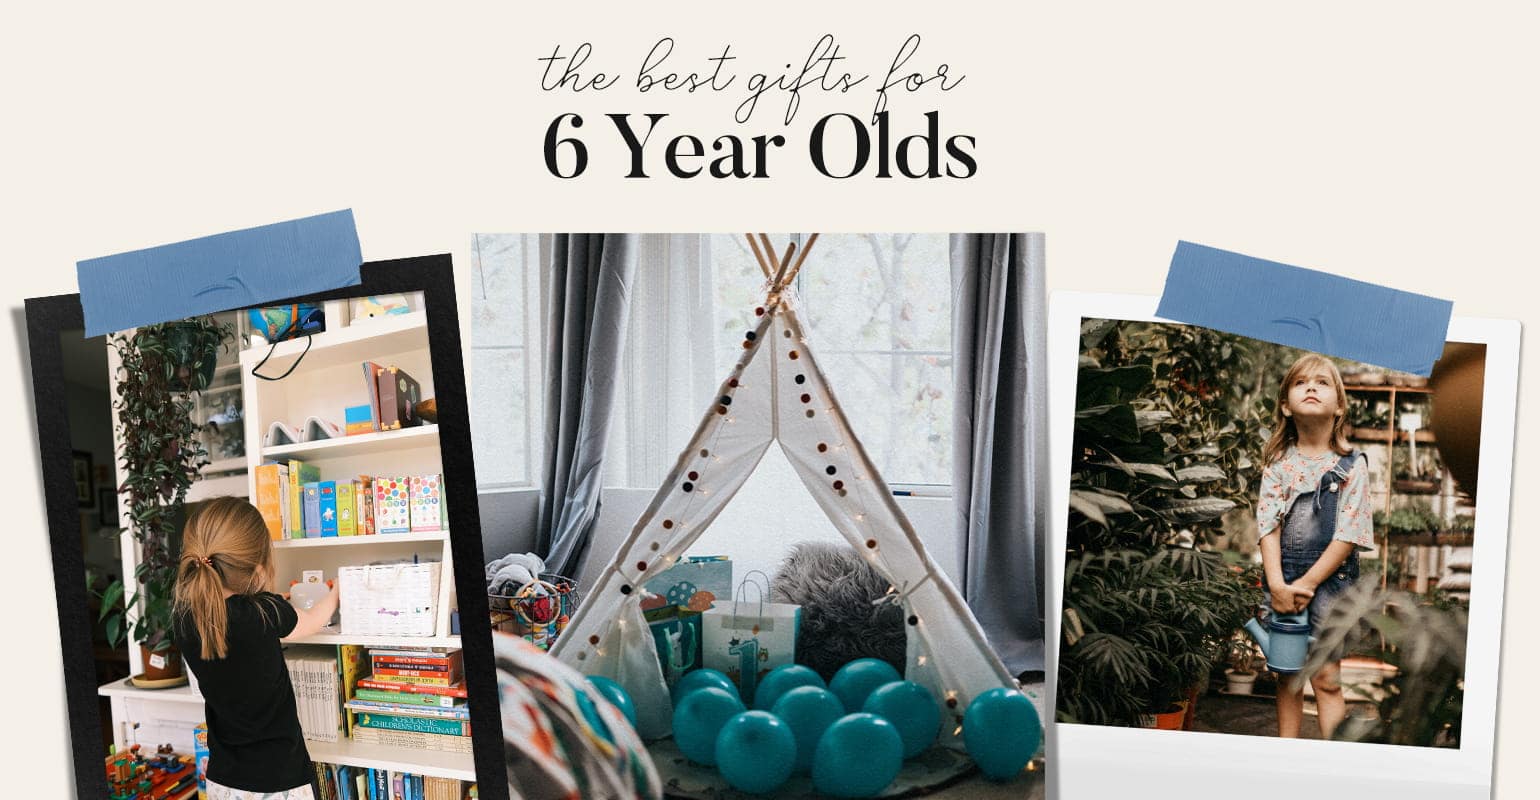 15 Fun Gifts for 6 Year Olds (Kid-approved)